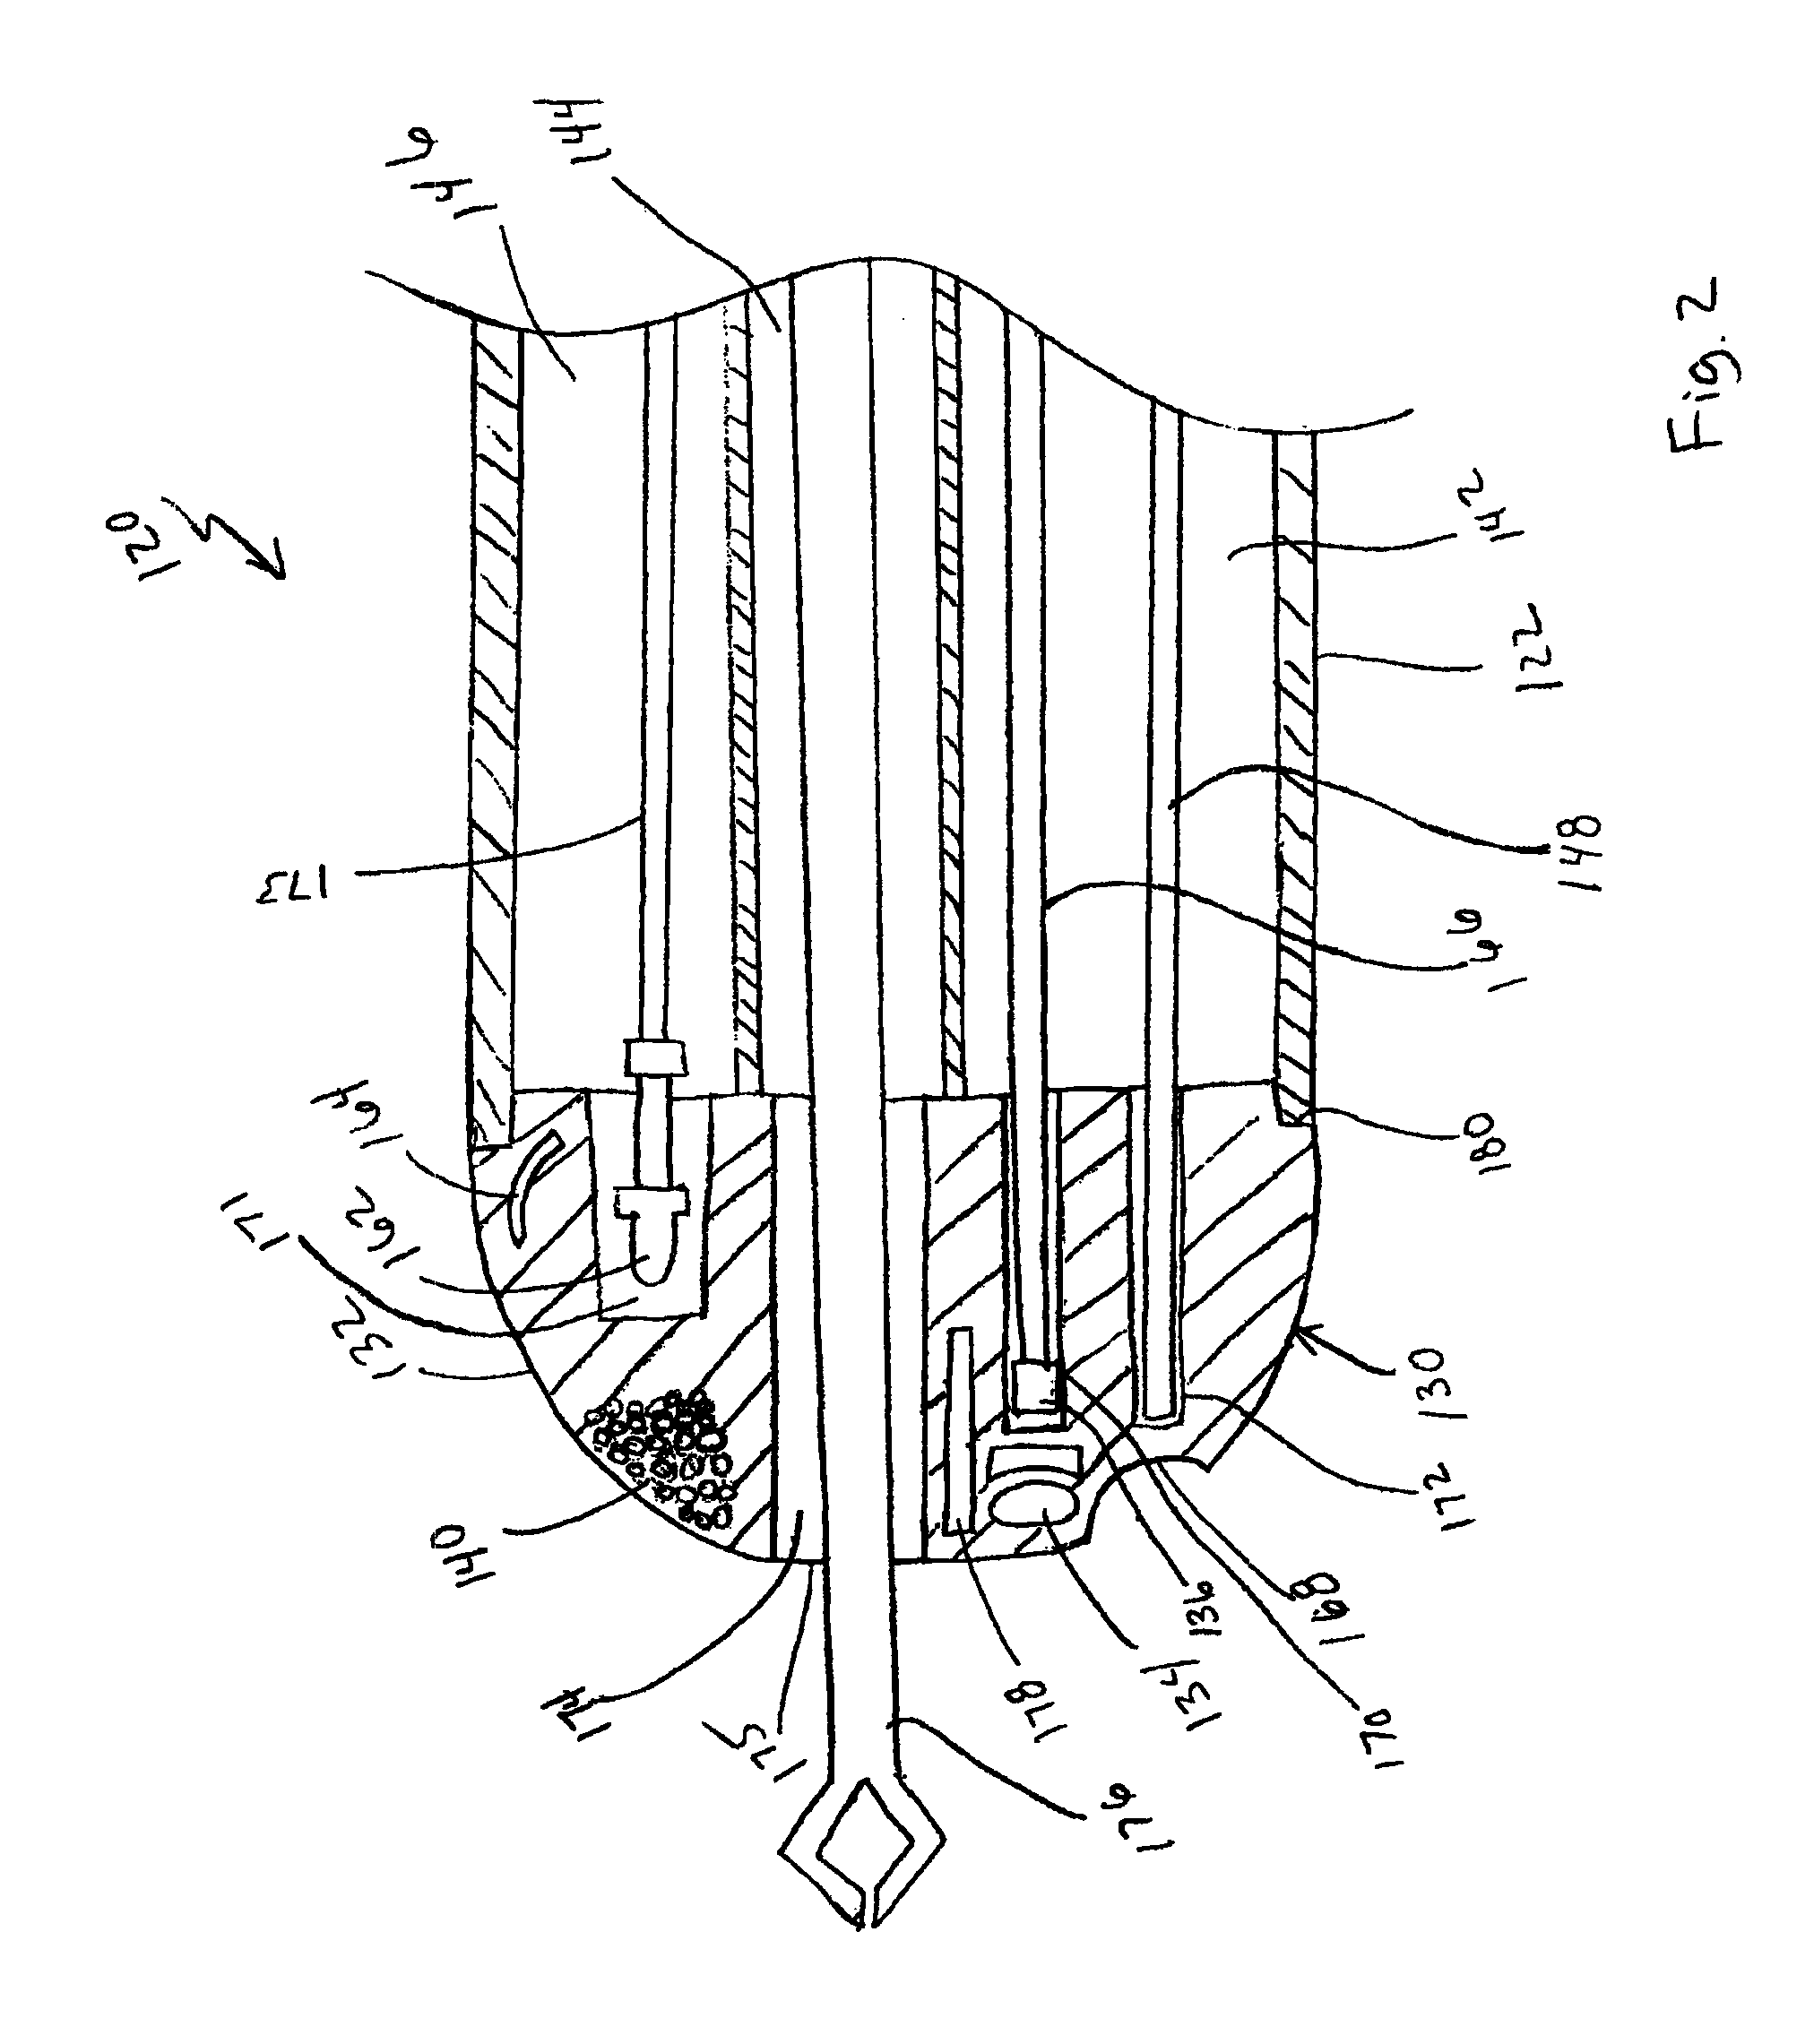 Endoscope with distal tip having encased optical components and display orientation capabilities